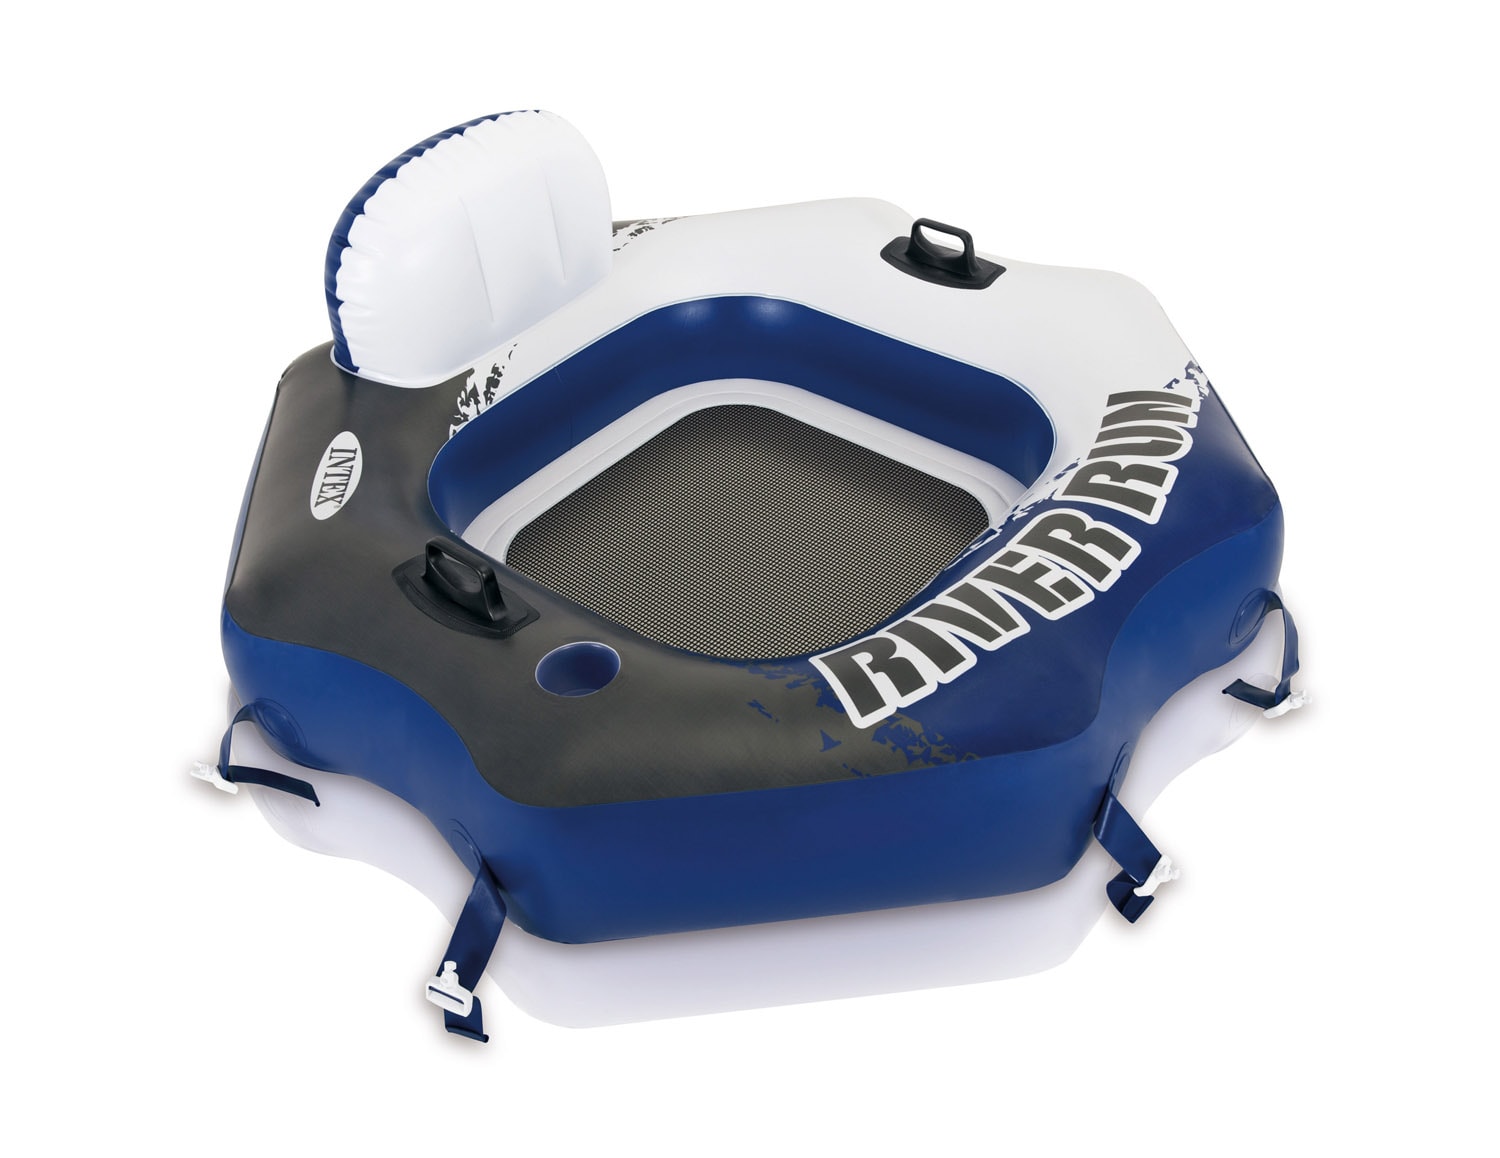 Intex 53-in x 53-in 1-Seat Blue Inflatable Raft 2-Pack in the Pool Toys &  Floats department at